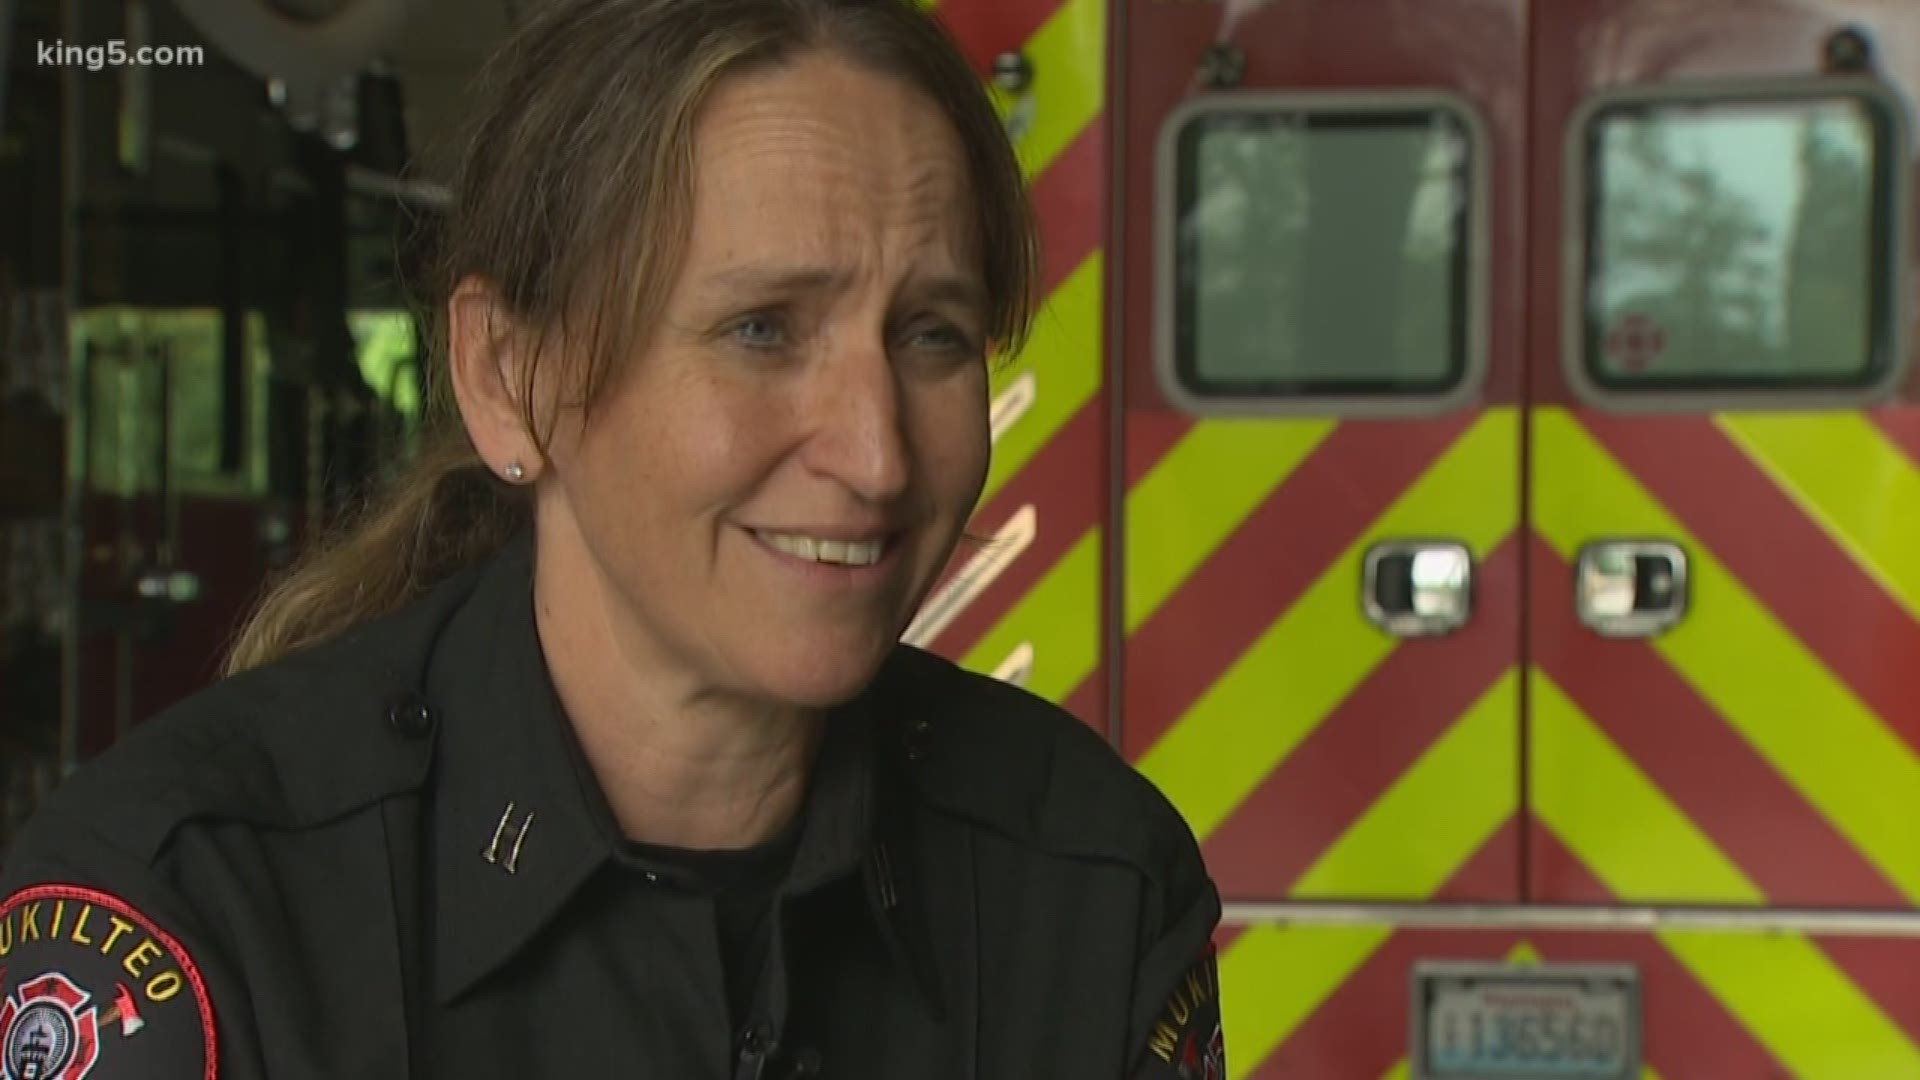 “I can stand as tall any of the men I work with,” said Kelli McNees. She was promoted to the rank of captain, the first woman to hold that role in the department.